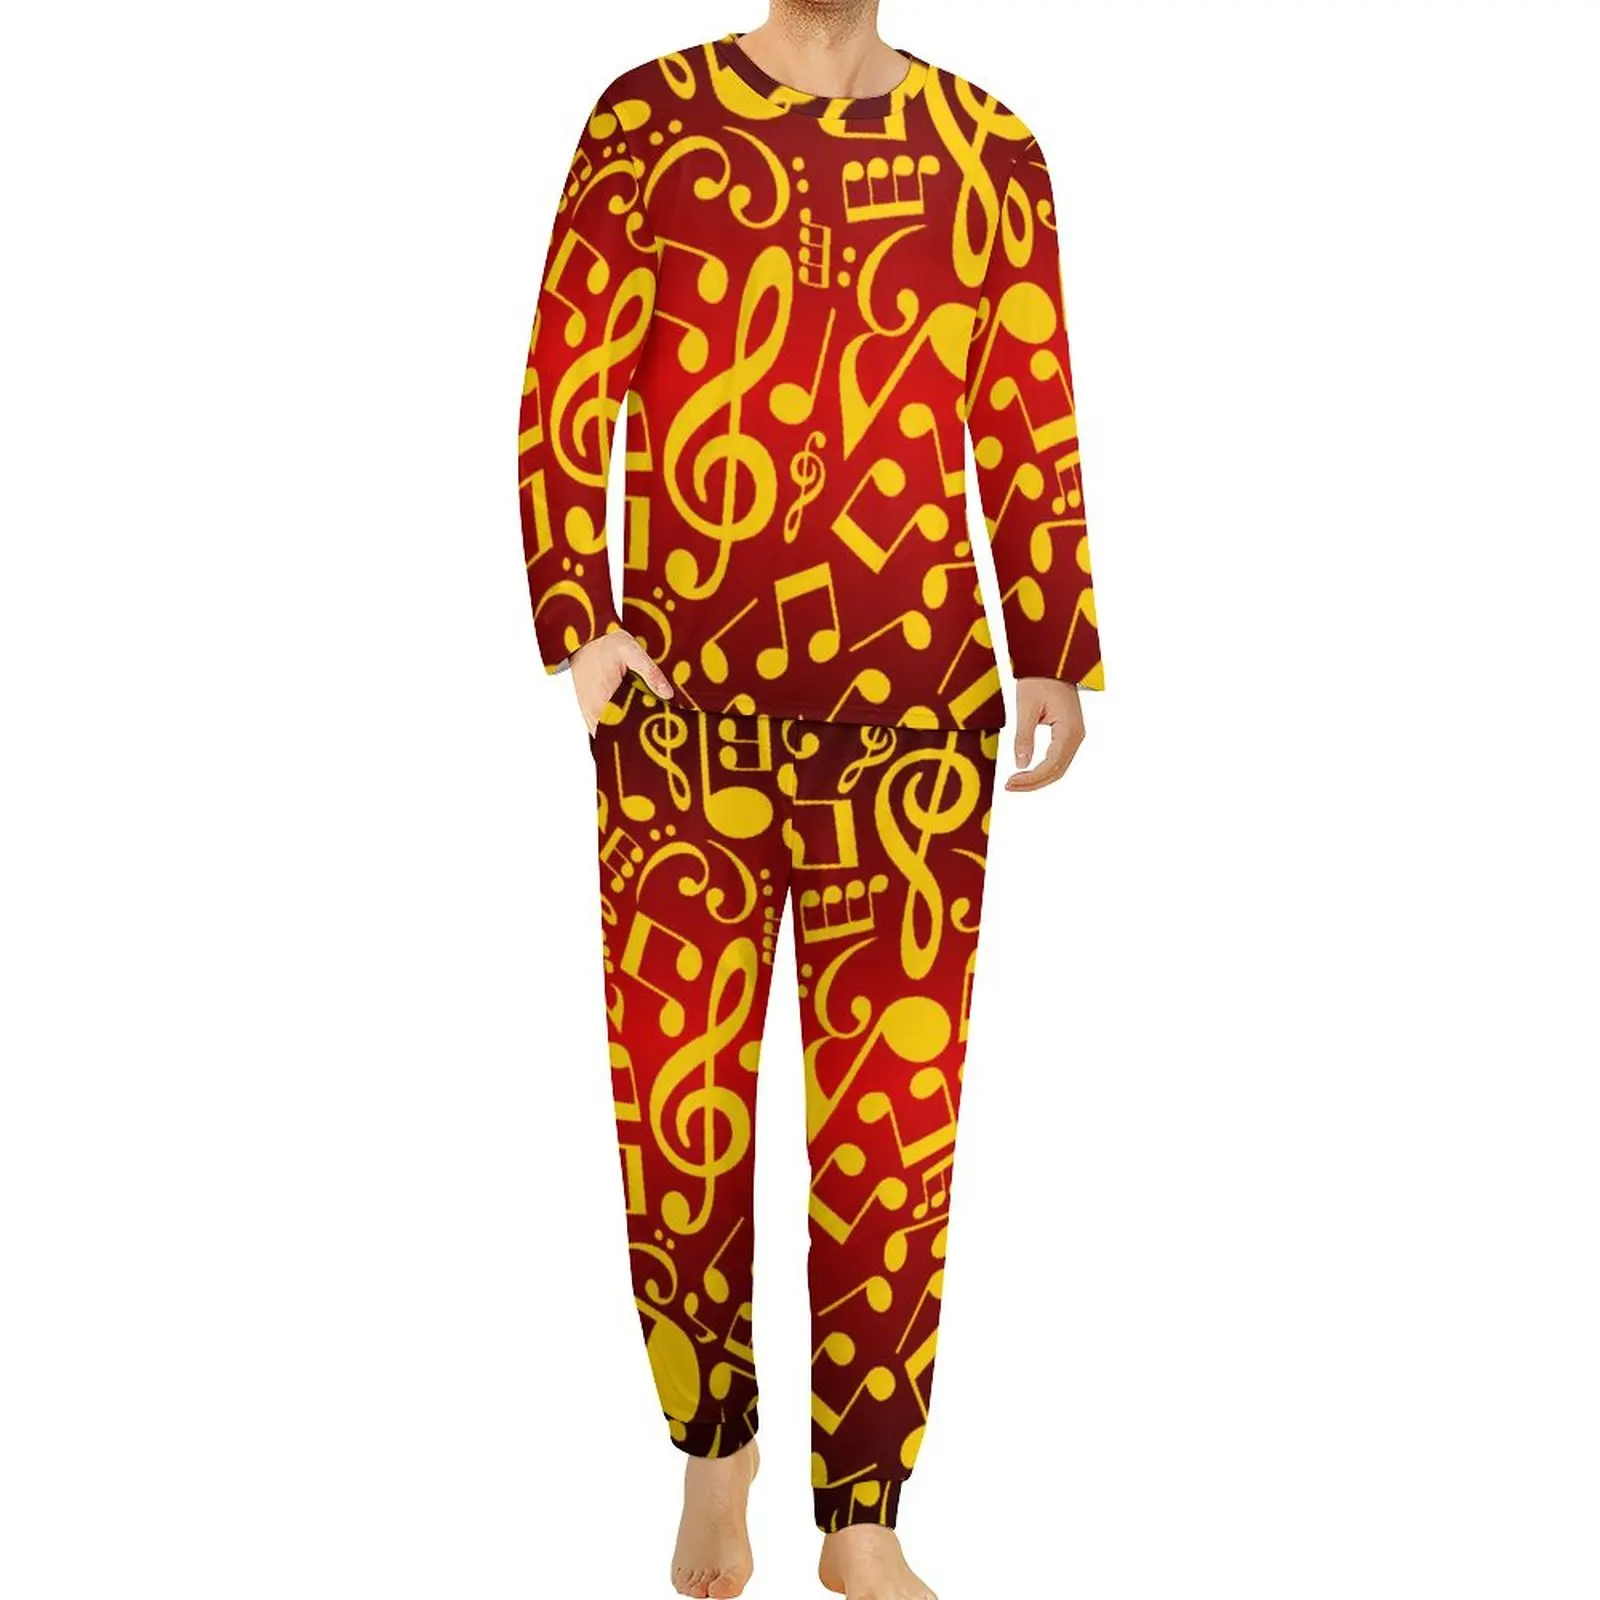 Music Notes Pajamas Men Red and Gold Cute Home Suit Spring Long Sleeve 2 Pieces Home Design Pajamas Set Big Size 4XL 5XL